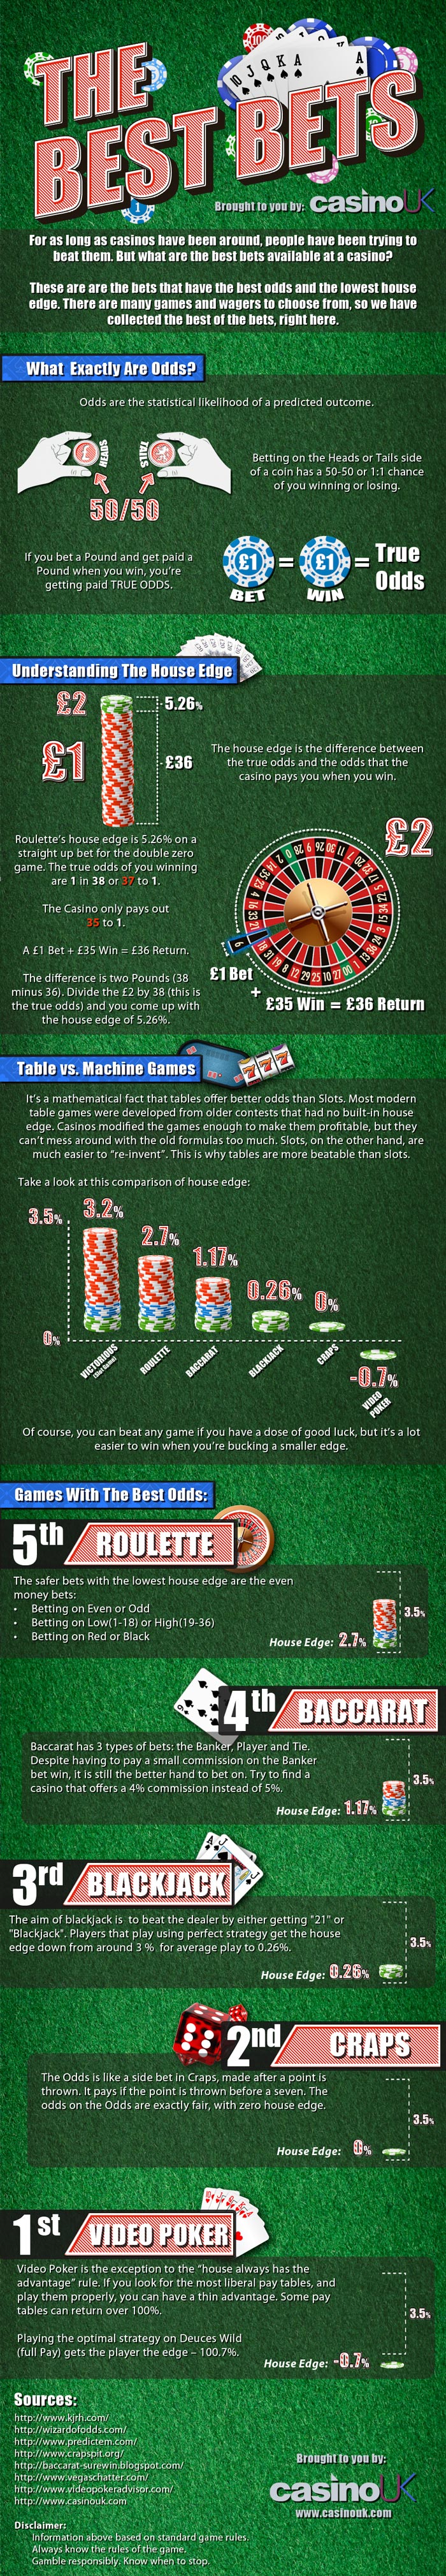 CUK Infographic Bets Bets